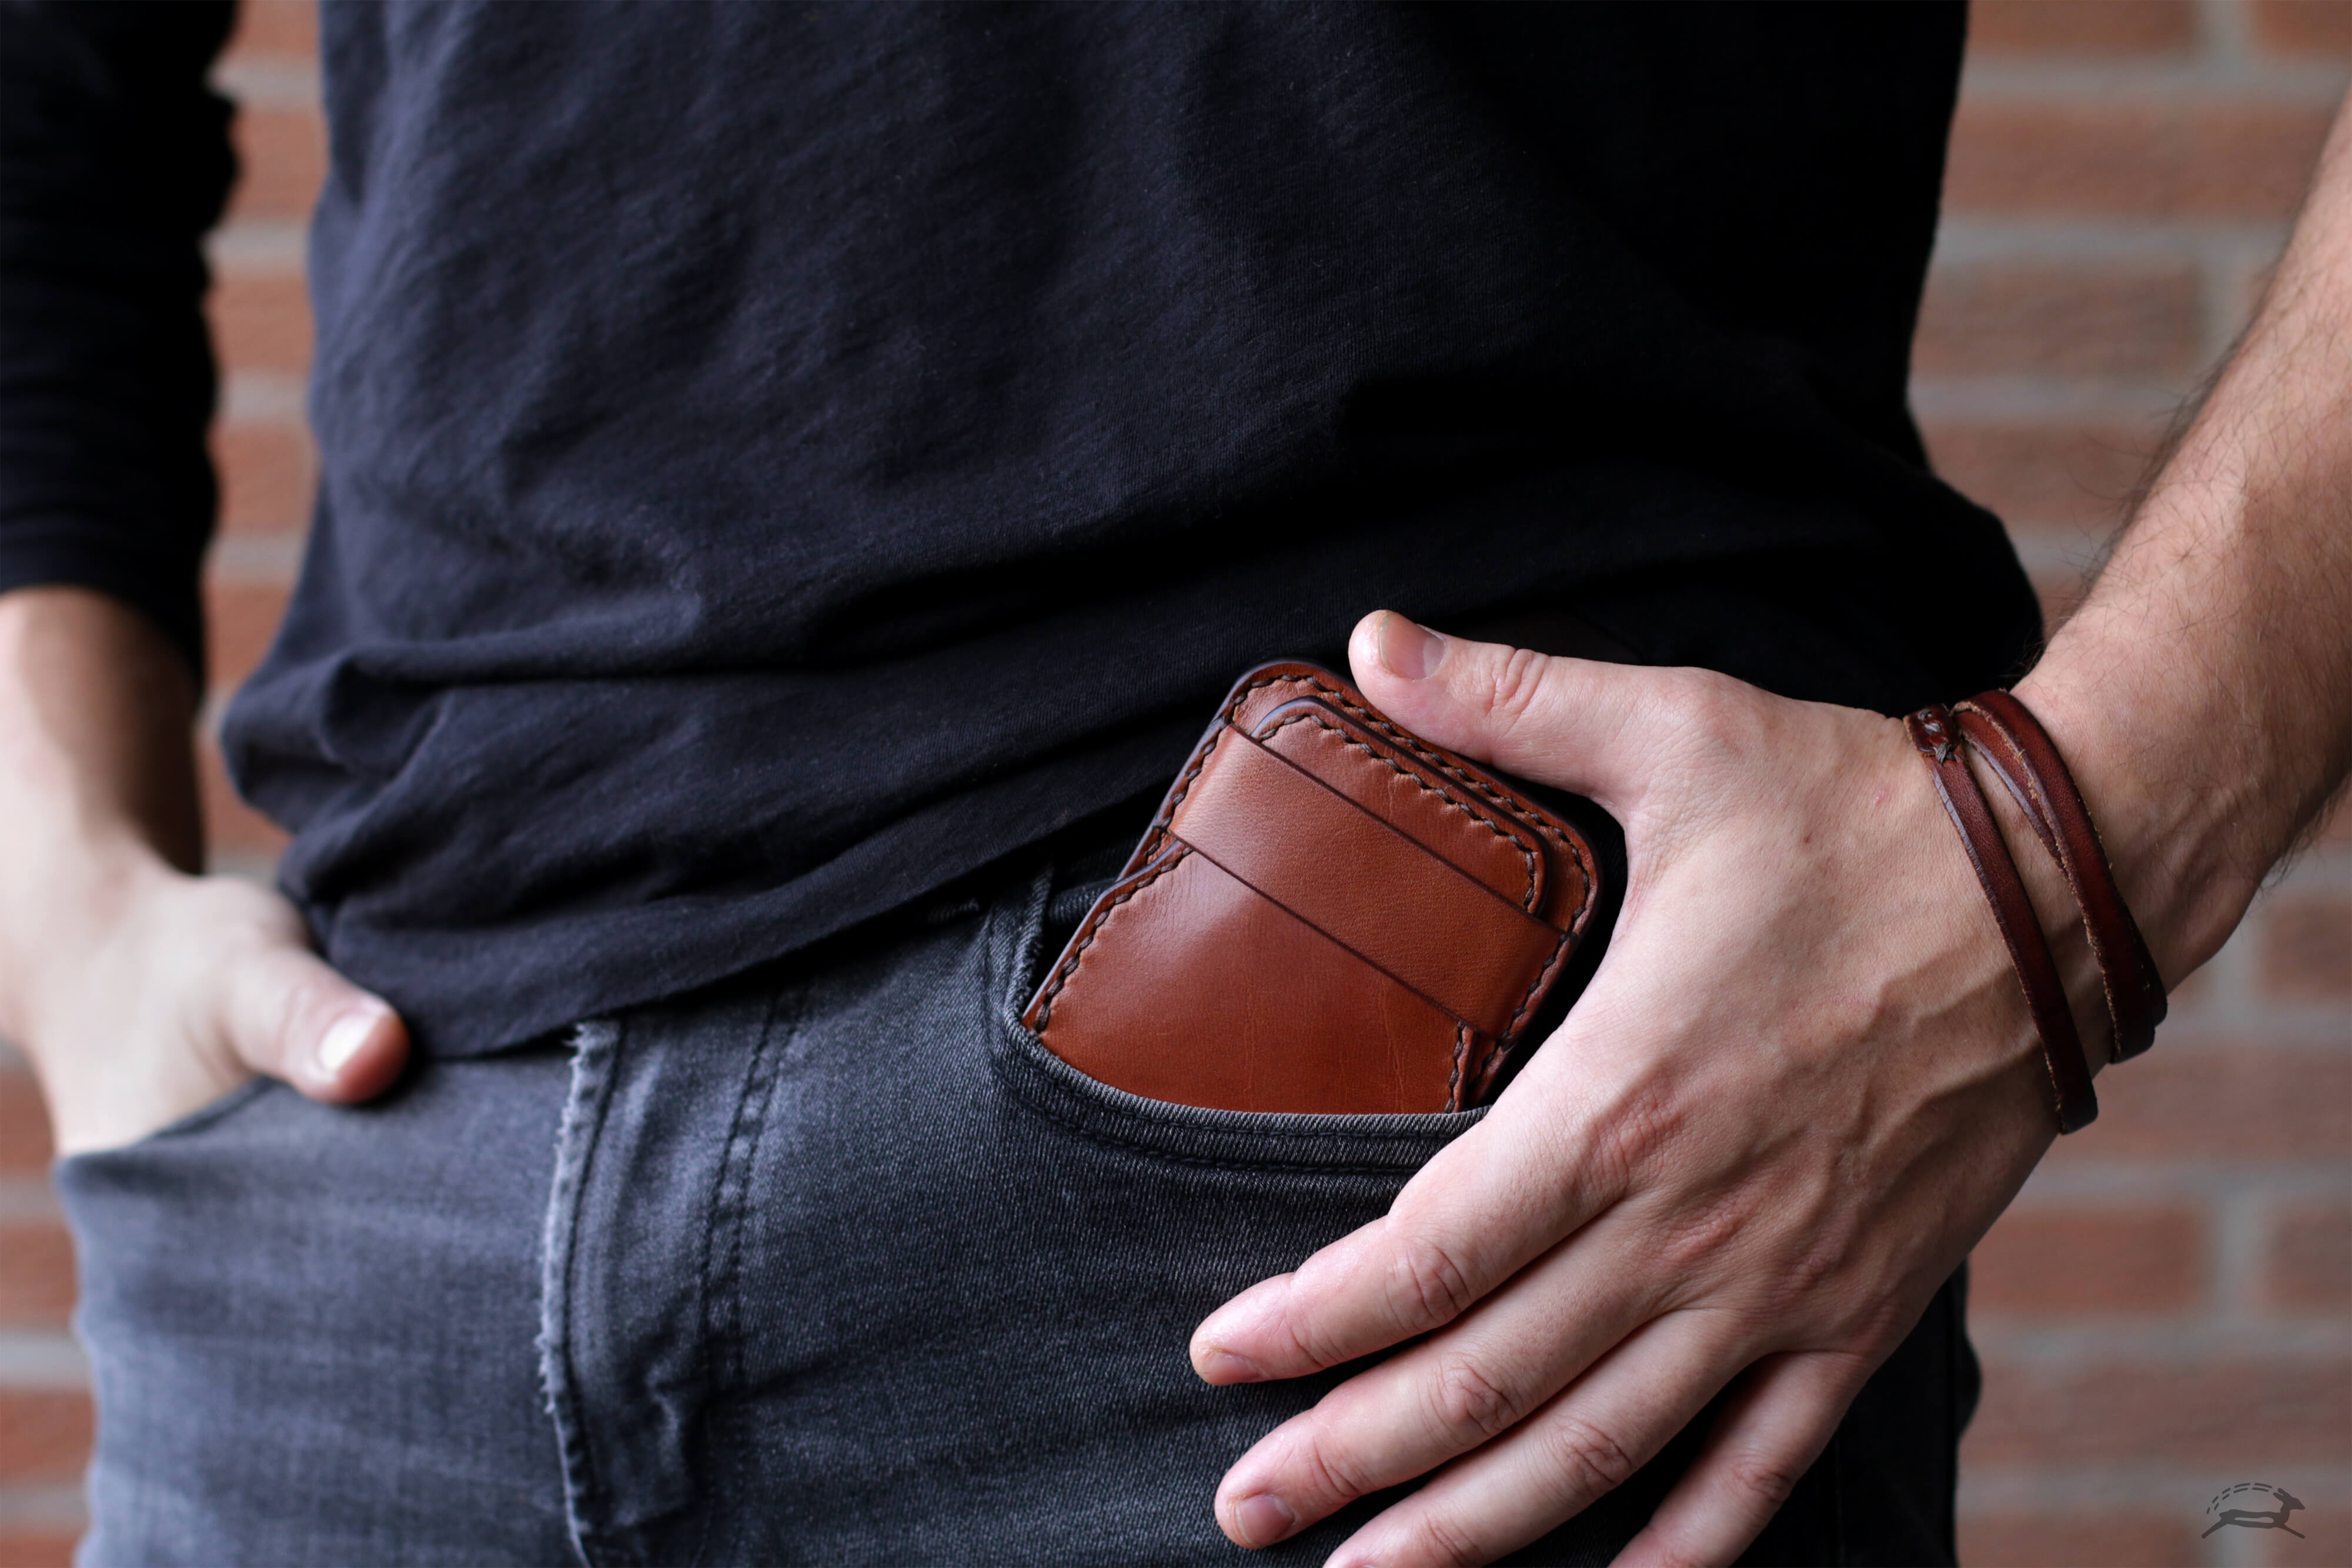 slim minimalist wallet for the front pocket - OCHRE handcrafted